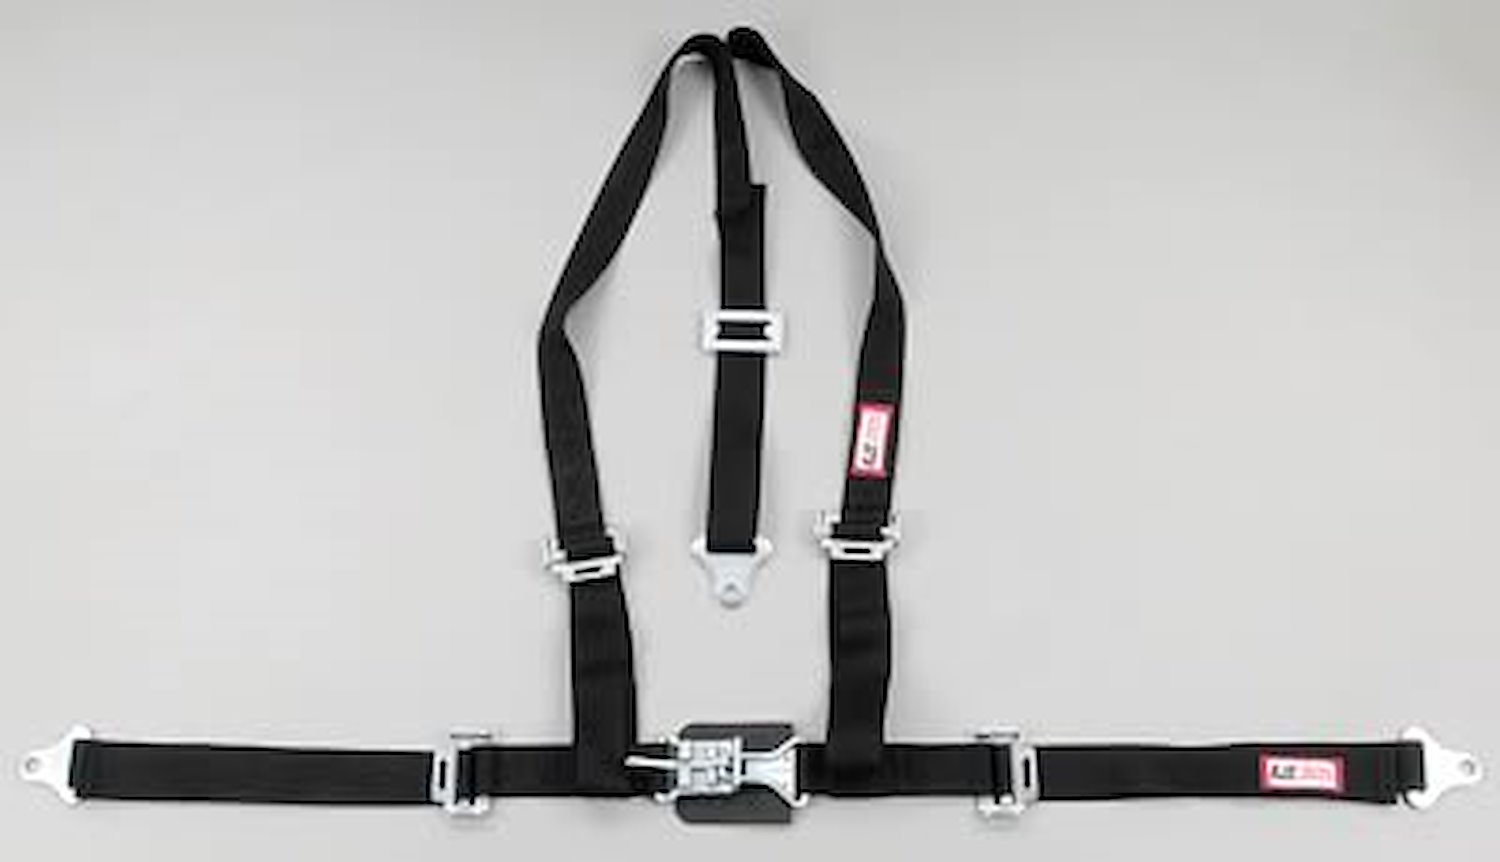 NON-SFI L&L HARNESS 3 PULL UP Lap Belt SEWN IN 2 S.H. Individual FLOOR Mount w/STERNUM STRAP ALL WRAP ENDS ORANGE